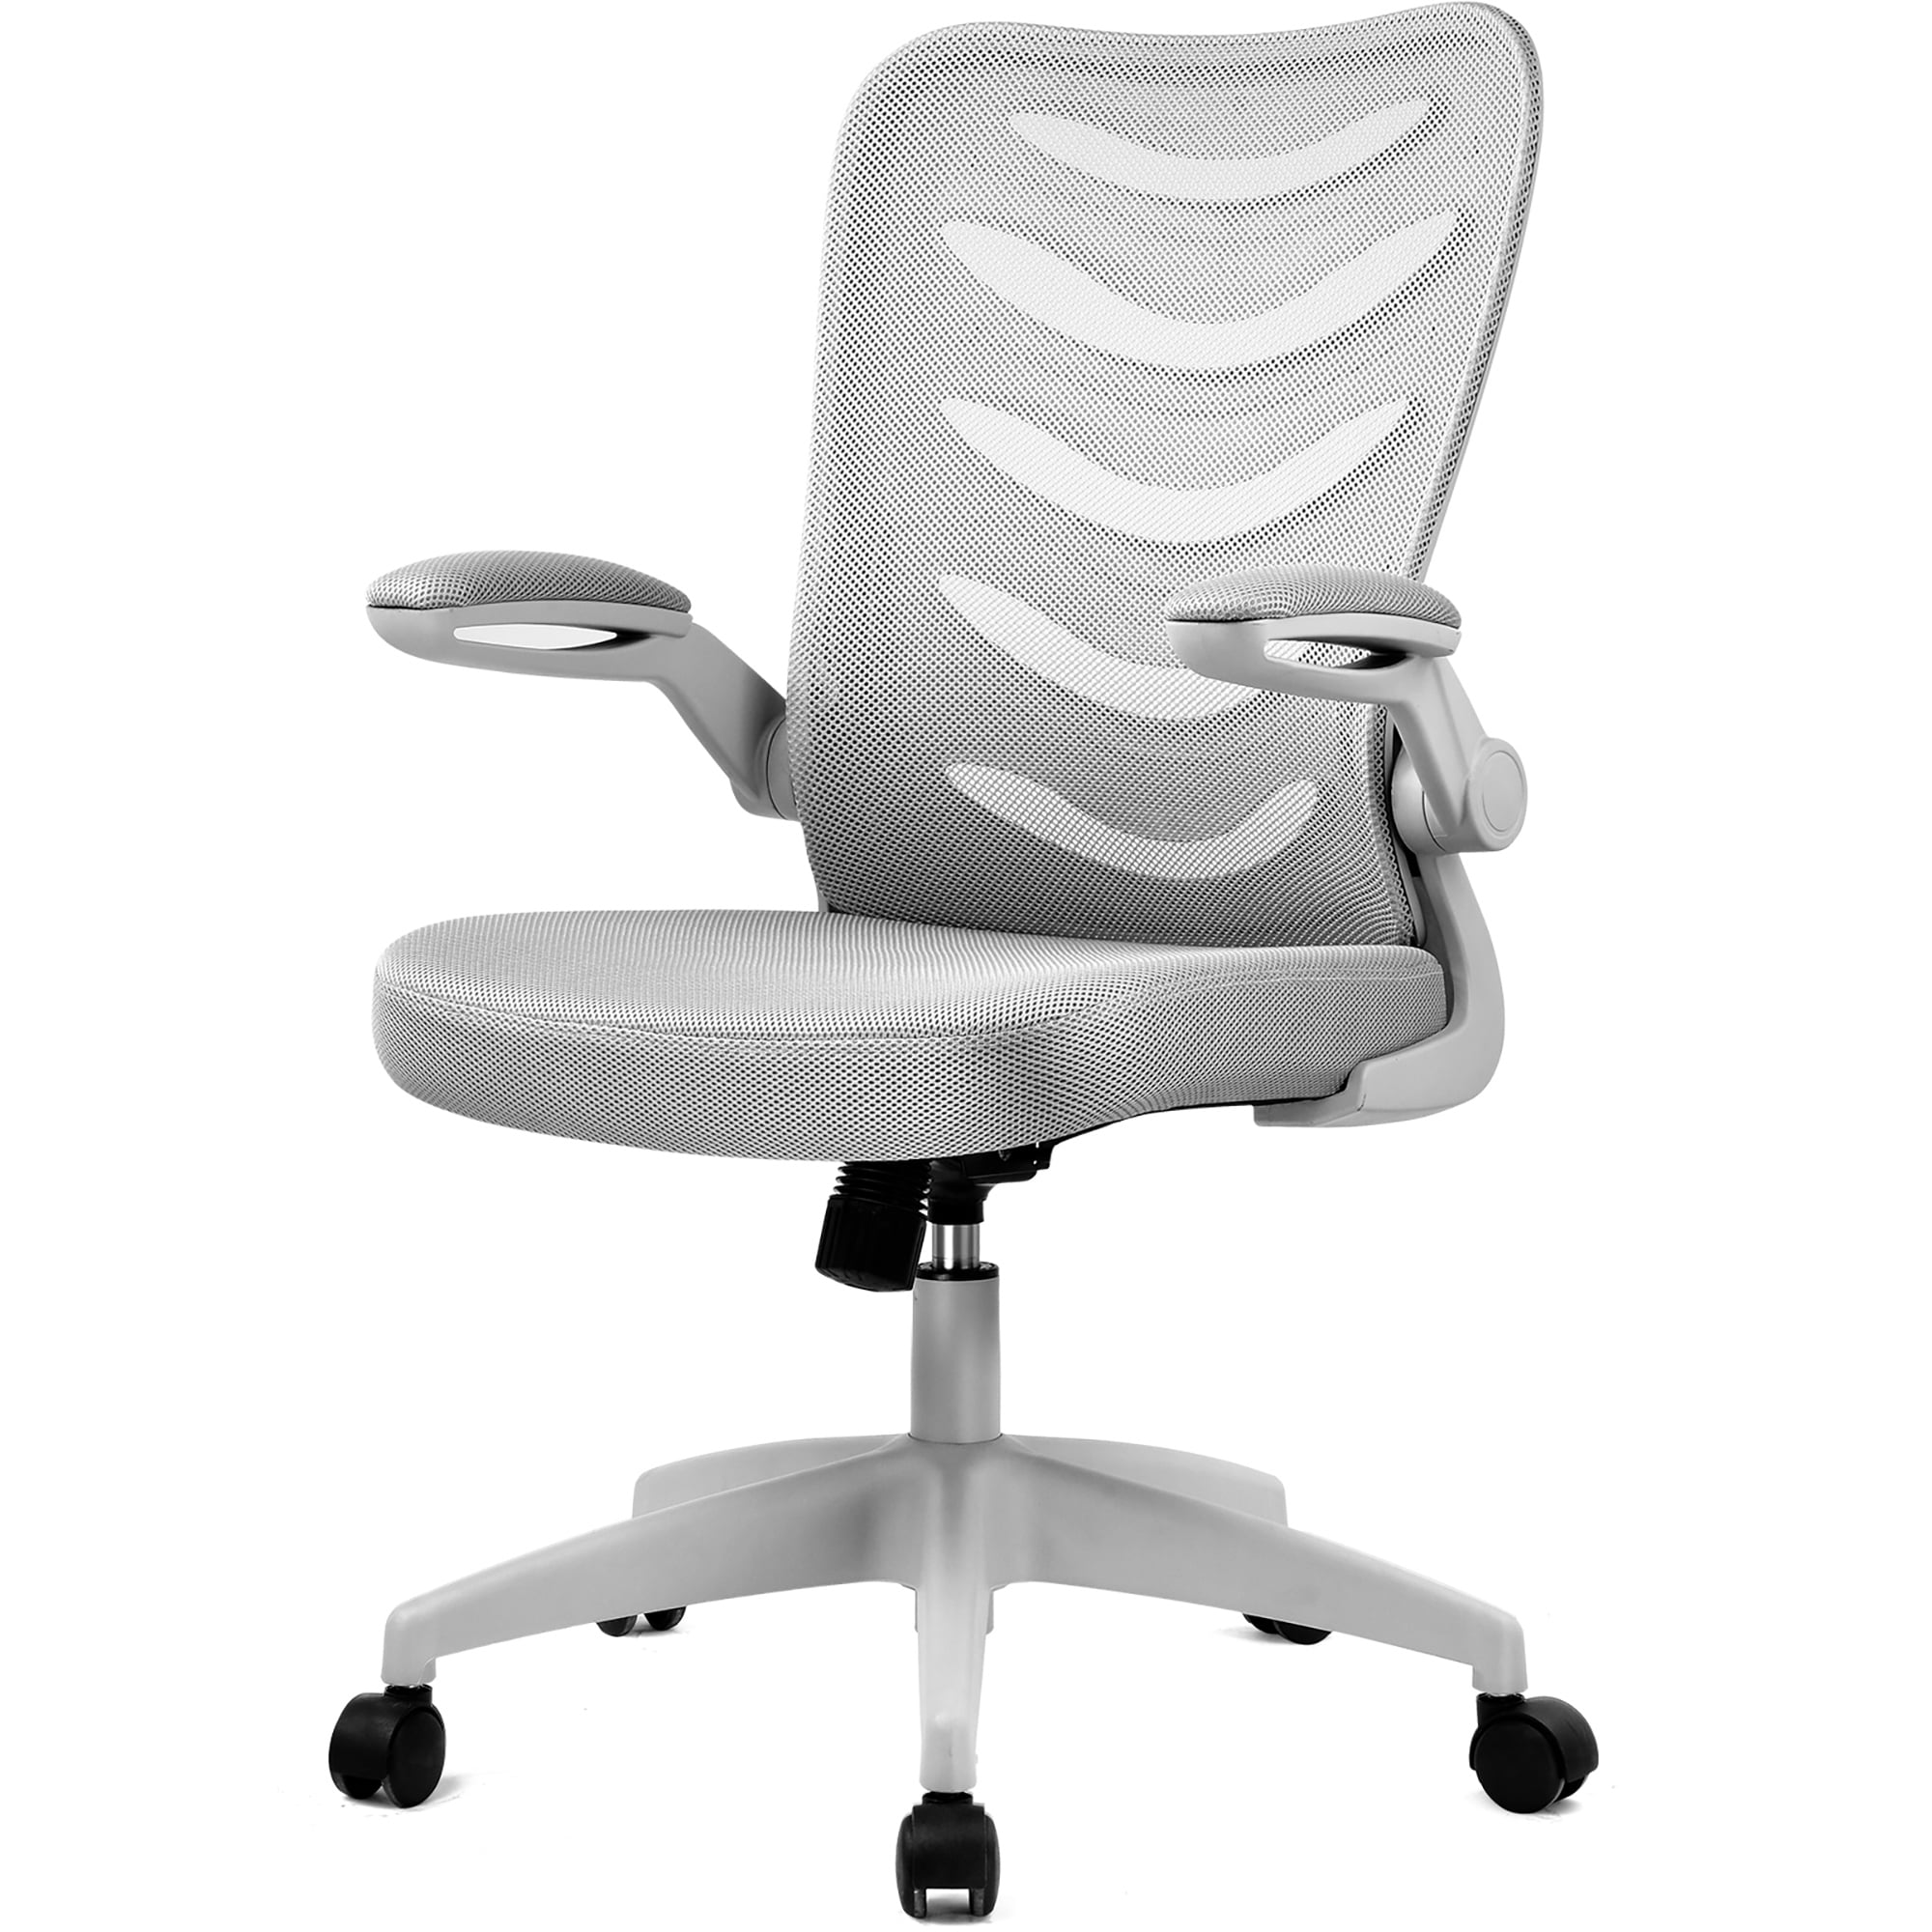 ComHoma Office Chair High Back Desk Chair Mesh Computer Chair for Home Office Executive Swivel Task Chair with Adjustable Seat Height Thick Seat Cushion Gray 